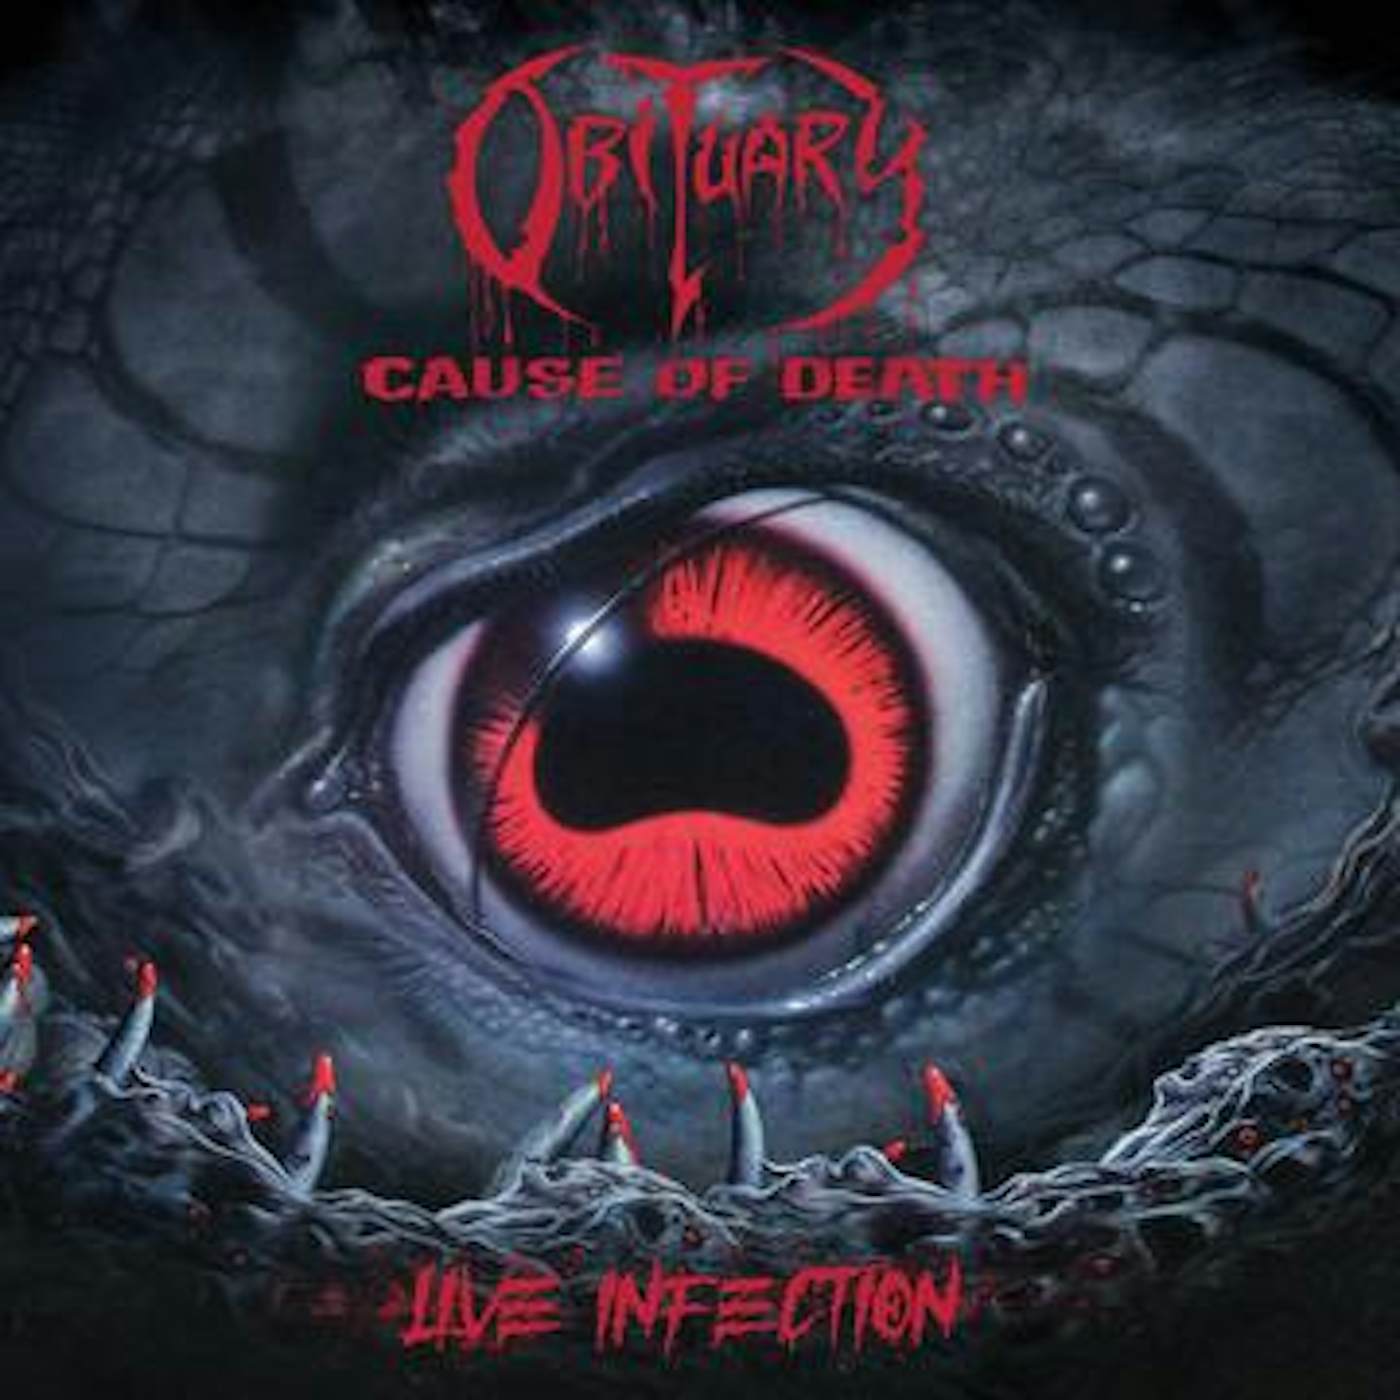 Obituary CAUSE OF DEATH - LIVE INFECTION CD